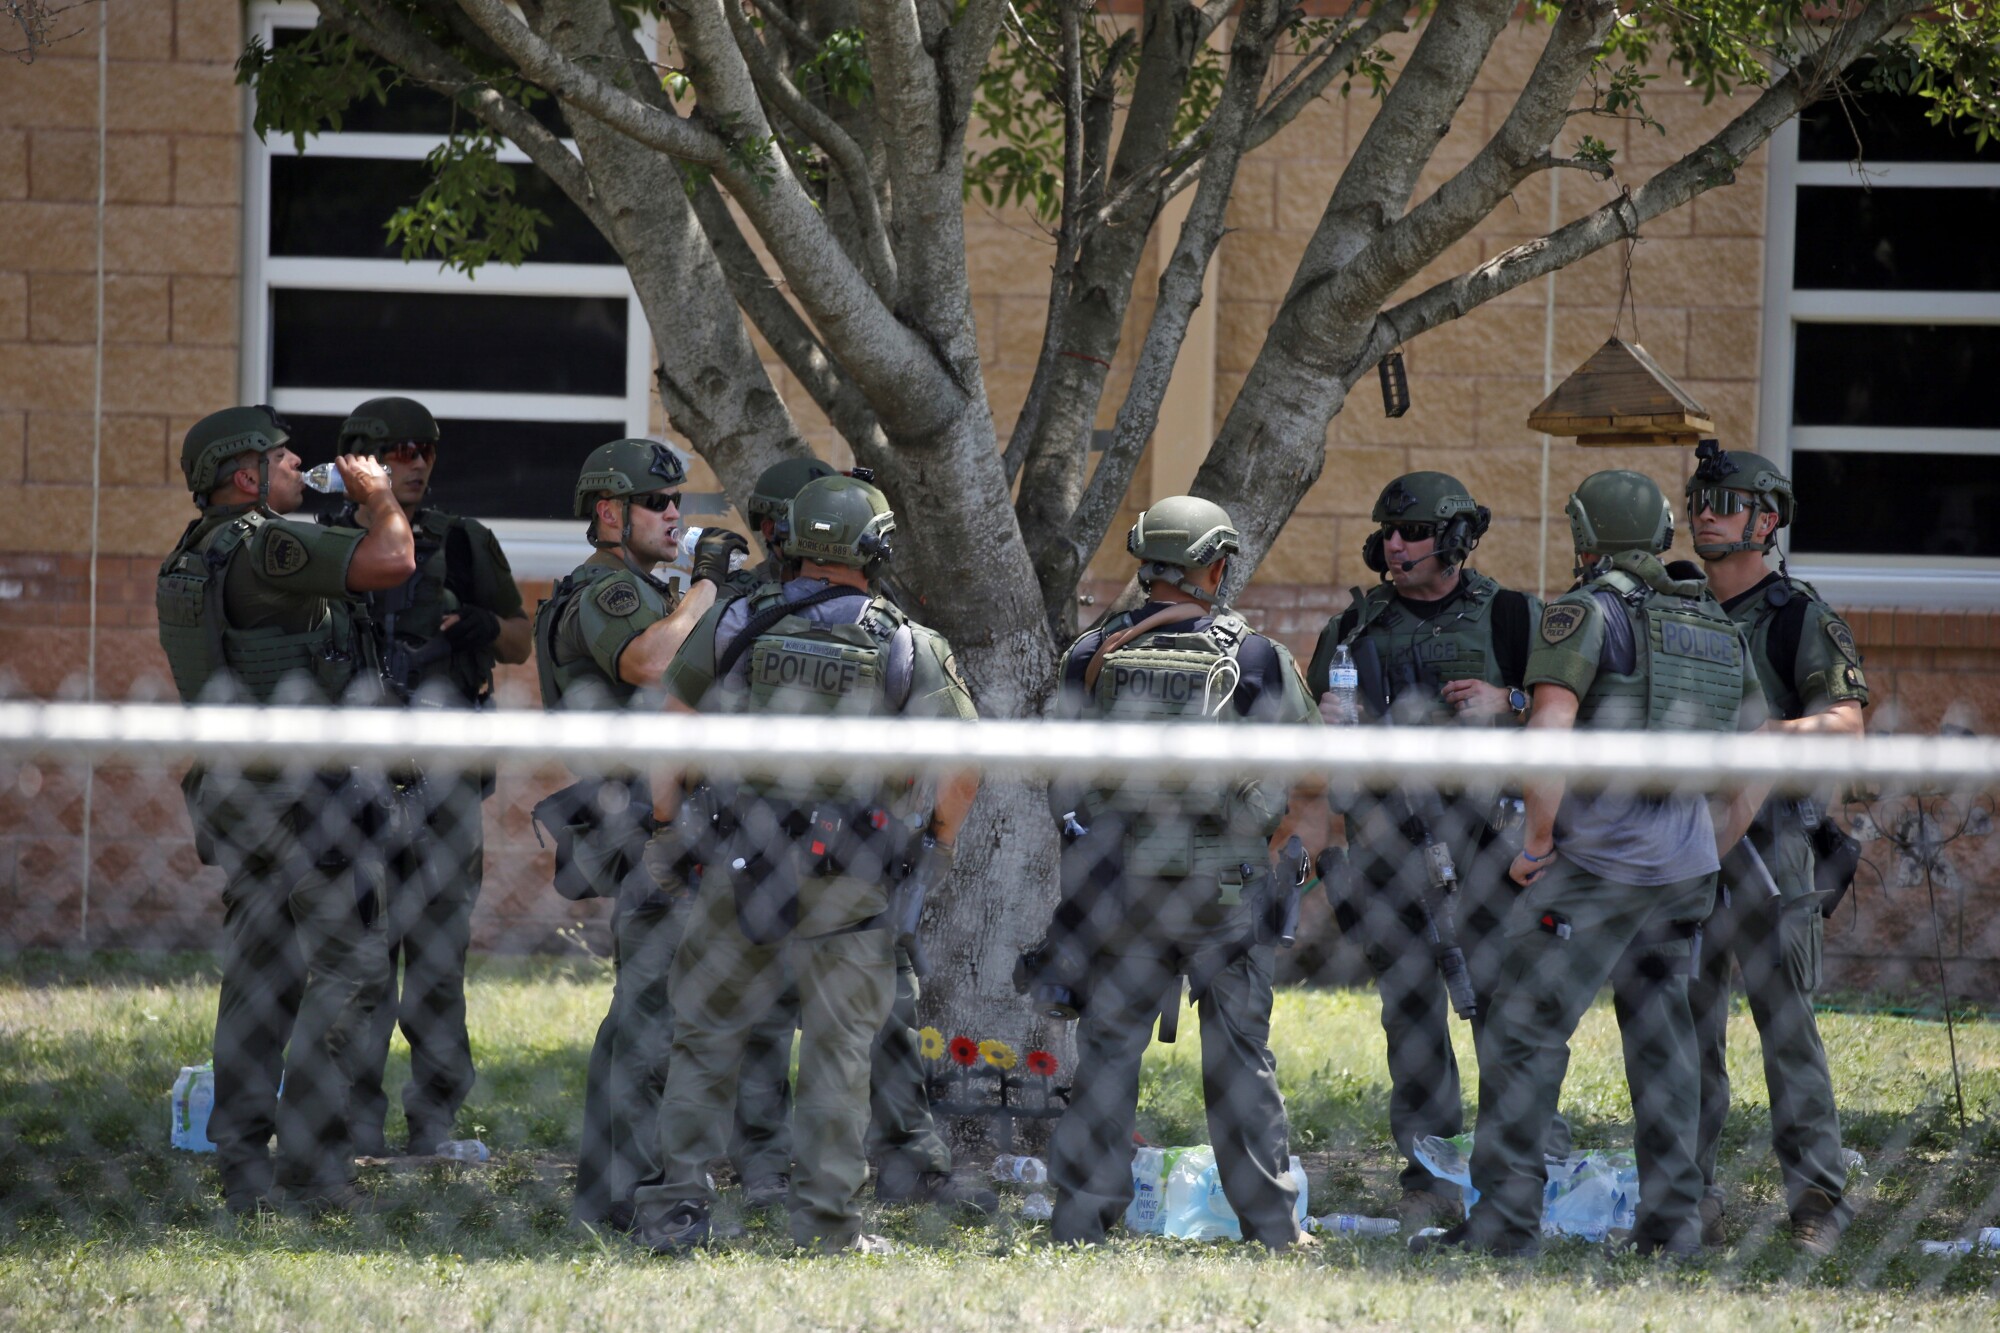 A group of officers in police uniform, some drinking water, stand under a tree near a building with windows
